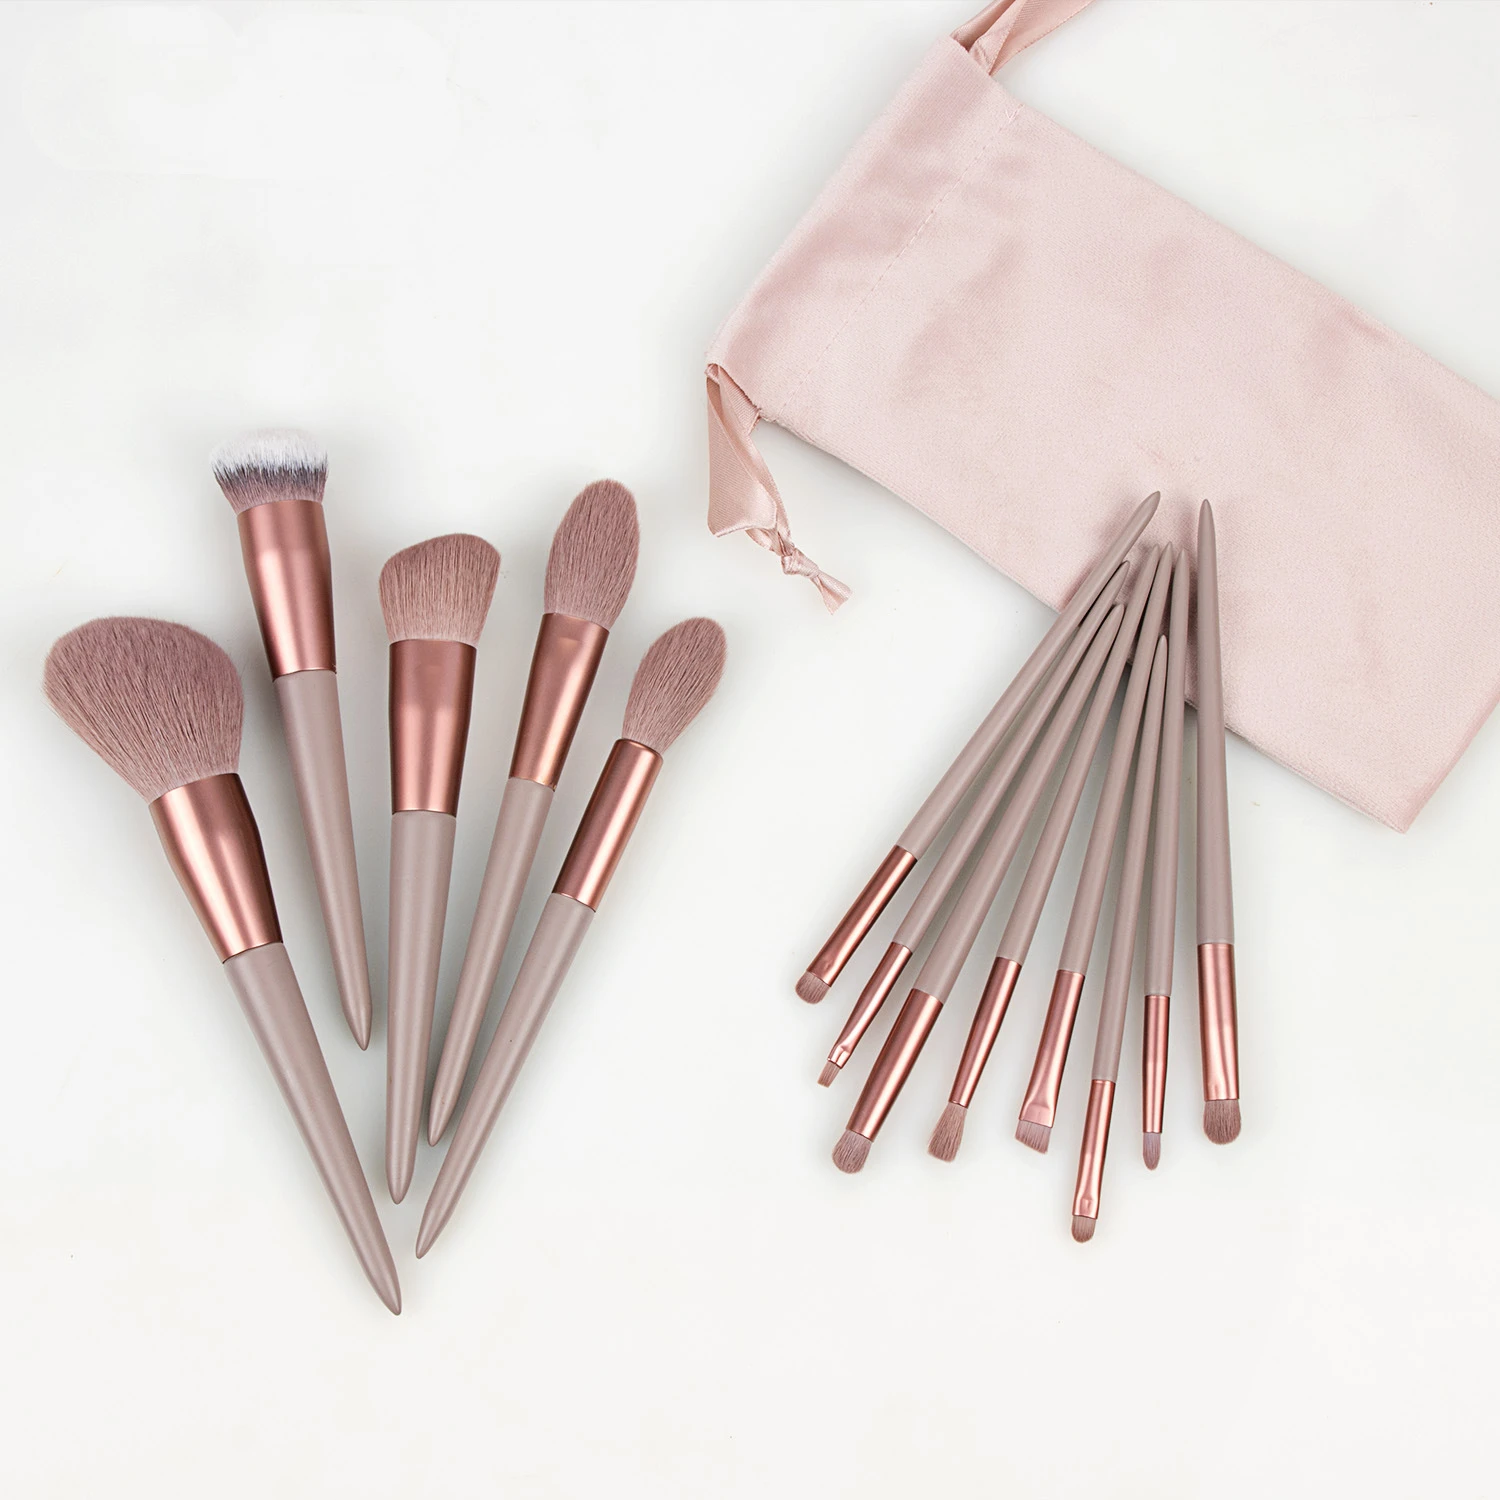 

13pcs OEM Synthetic Professional Makeup Brush Set Private Own Label Nylon Fluffy Top Quality Makeup Brushes Sale With Velvet Bag, 2 colors available